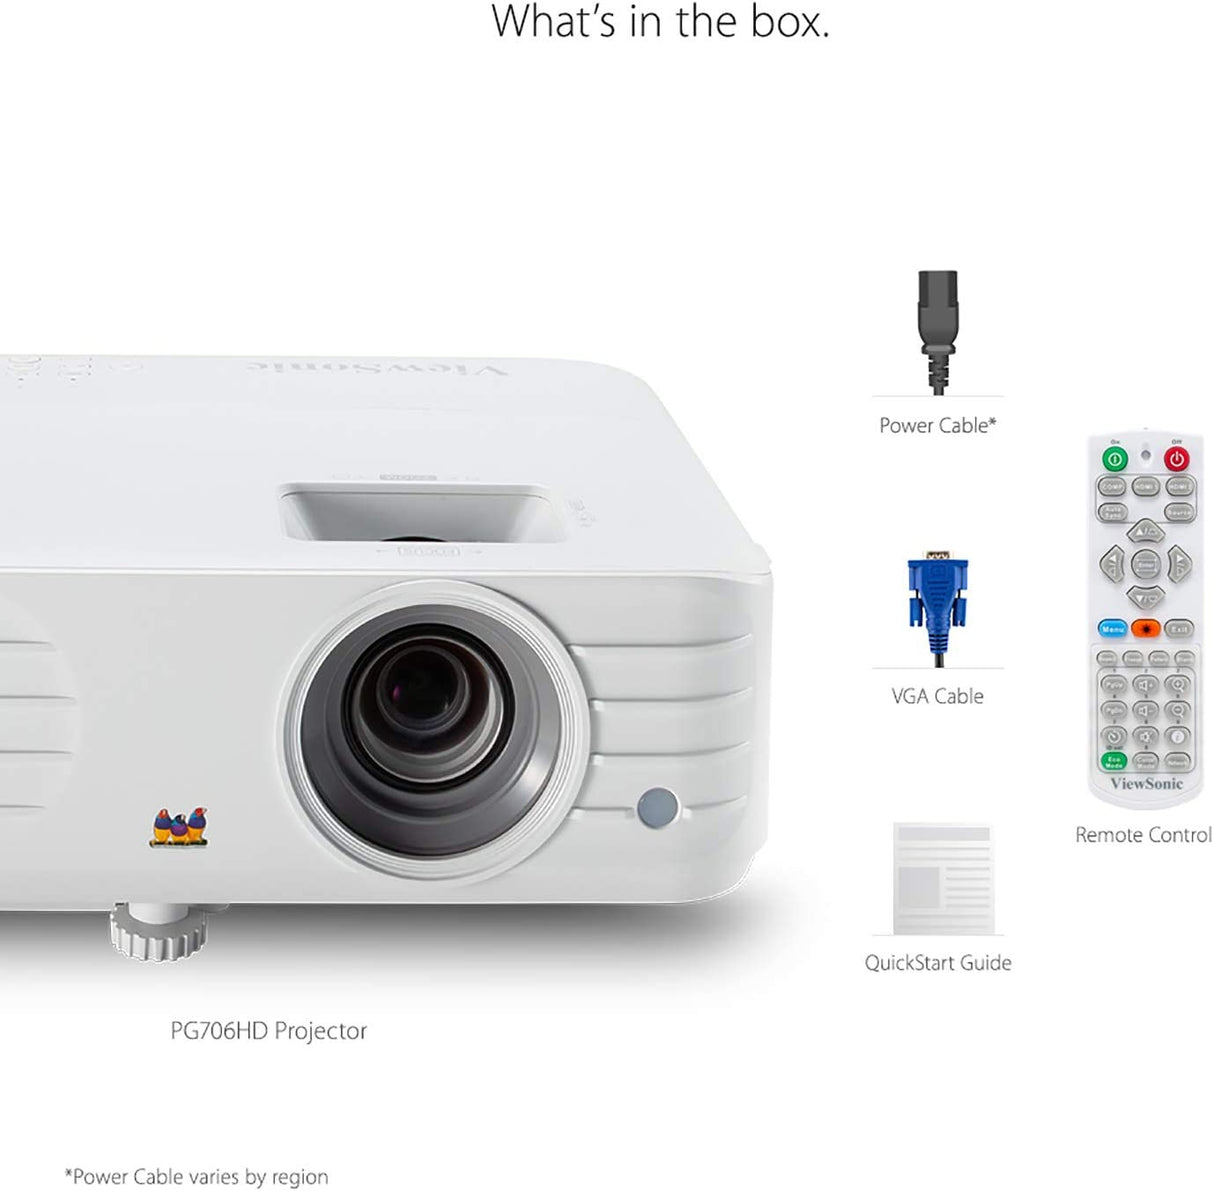 ViewSonic PG706HD 4000 Lumens Full HD 1080p Projector with RJ45 Lan Control Vertical Keystoning HDMI USB for Home and Office